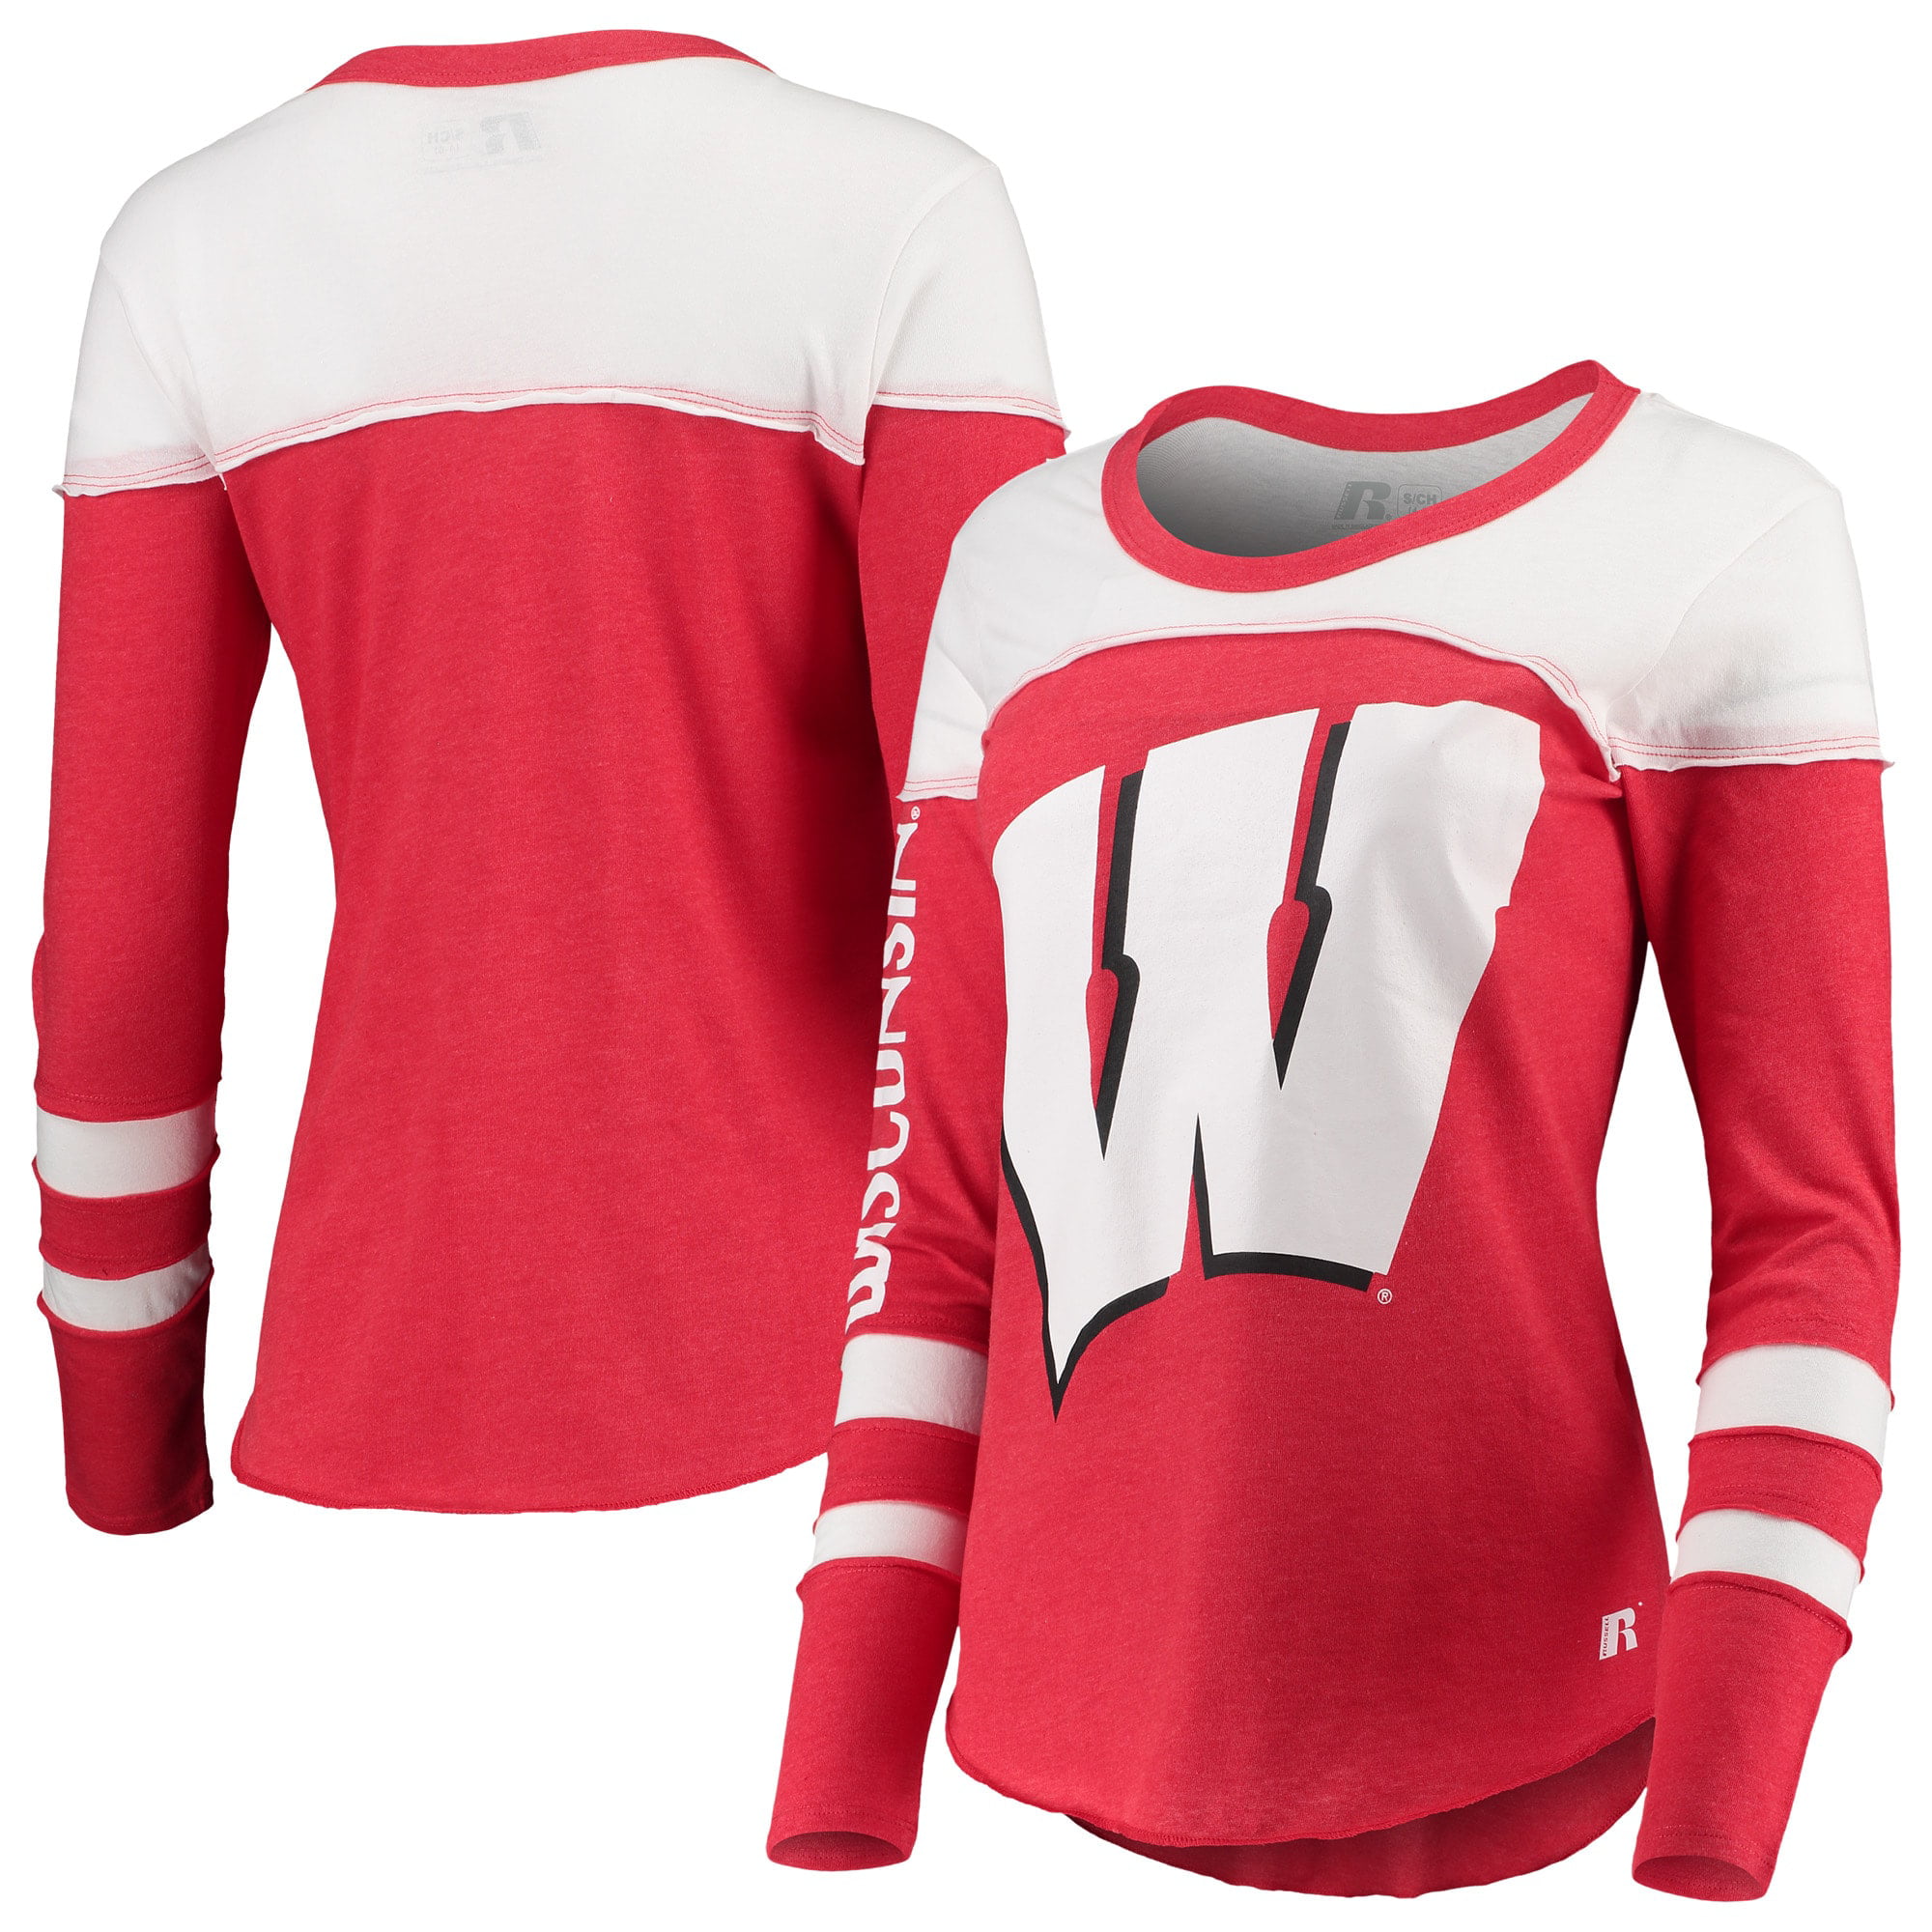 Ouray Sportswear NCAA Wisconsin Badgers Womens Admire Vest 2X White